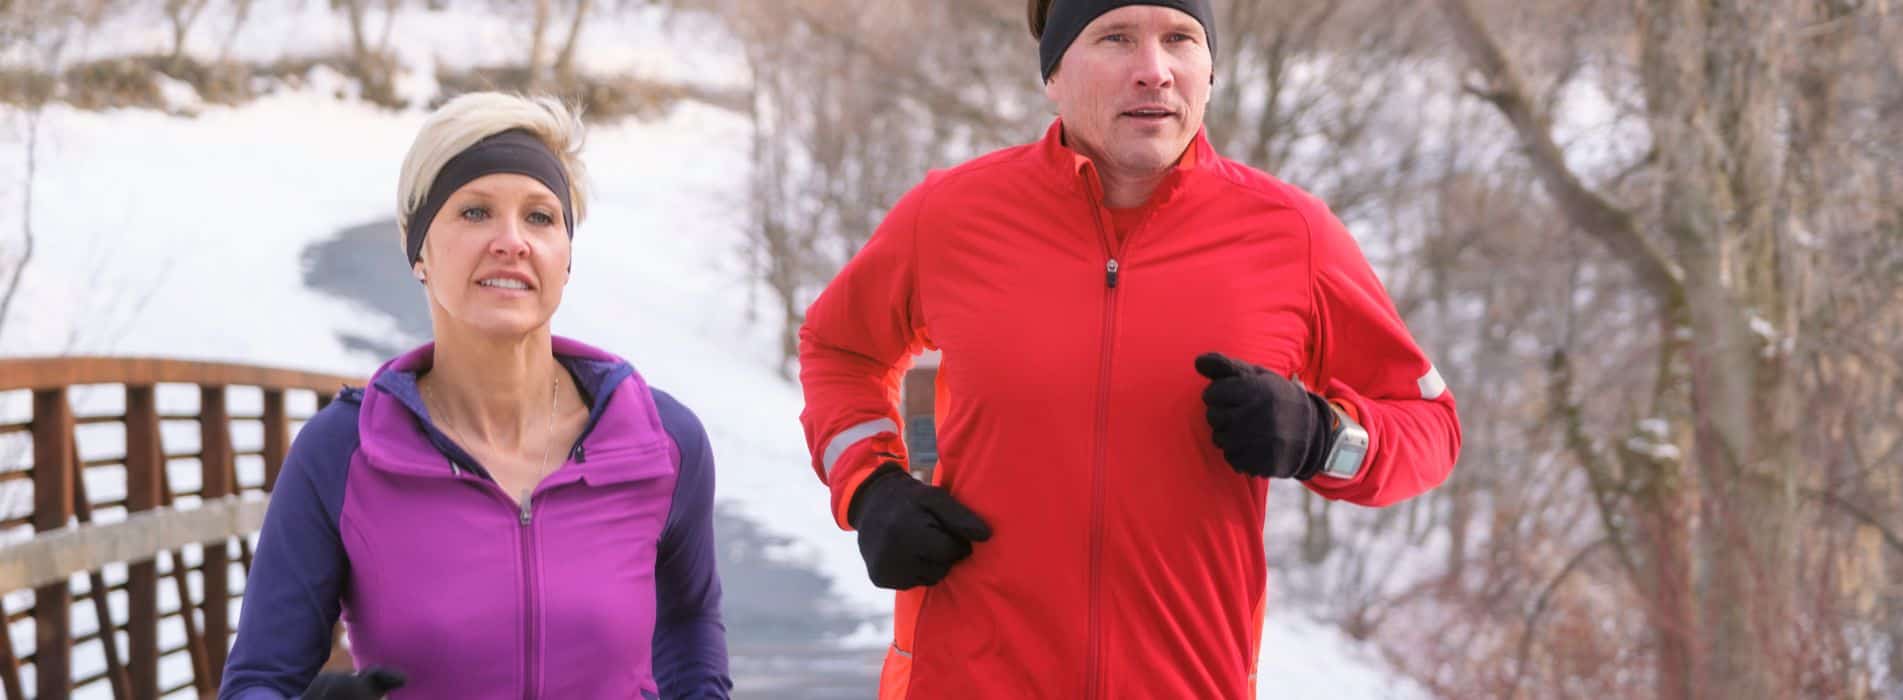 lose weight during the winter